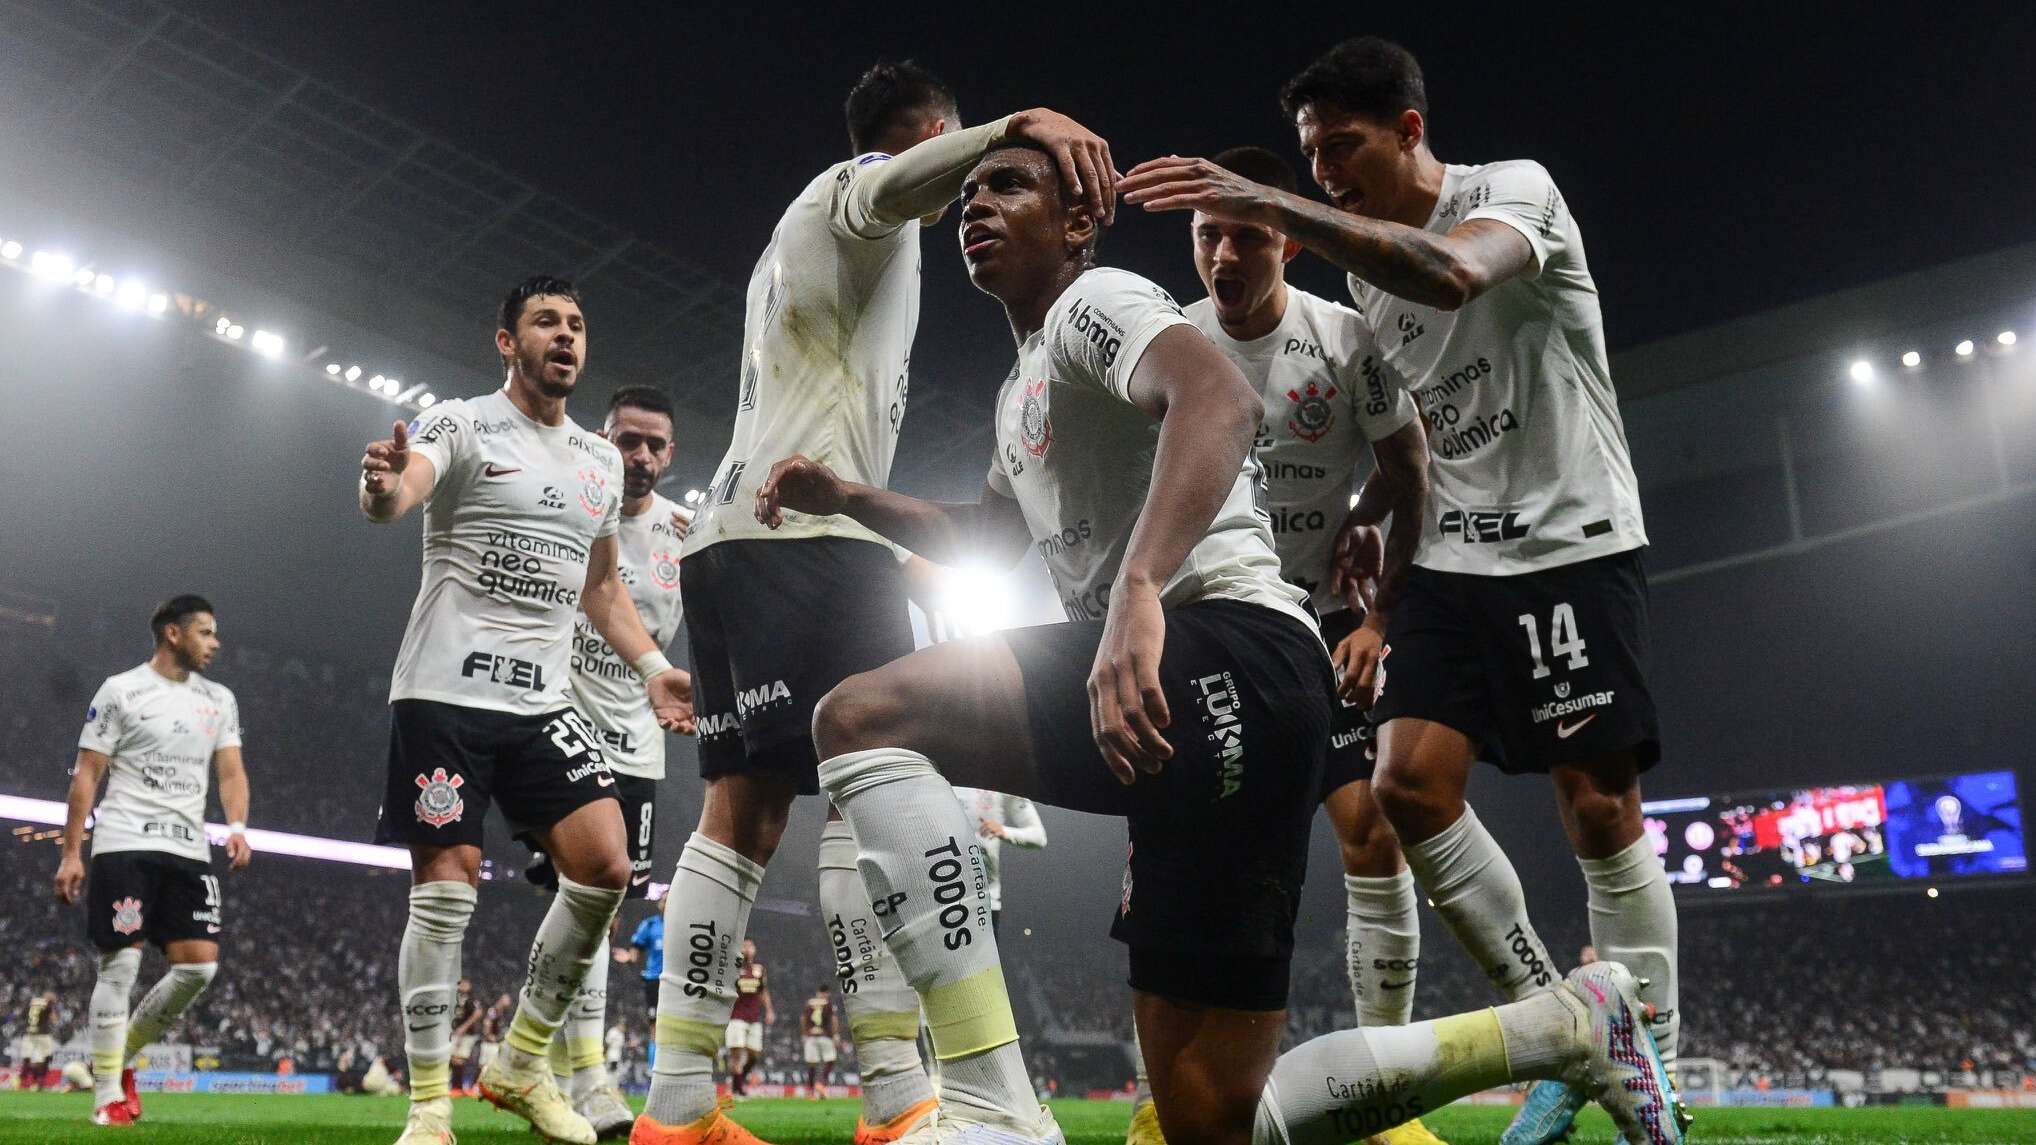 Corinthians surprises with reserve team and forwards qualification in Sul Americana